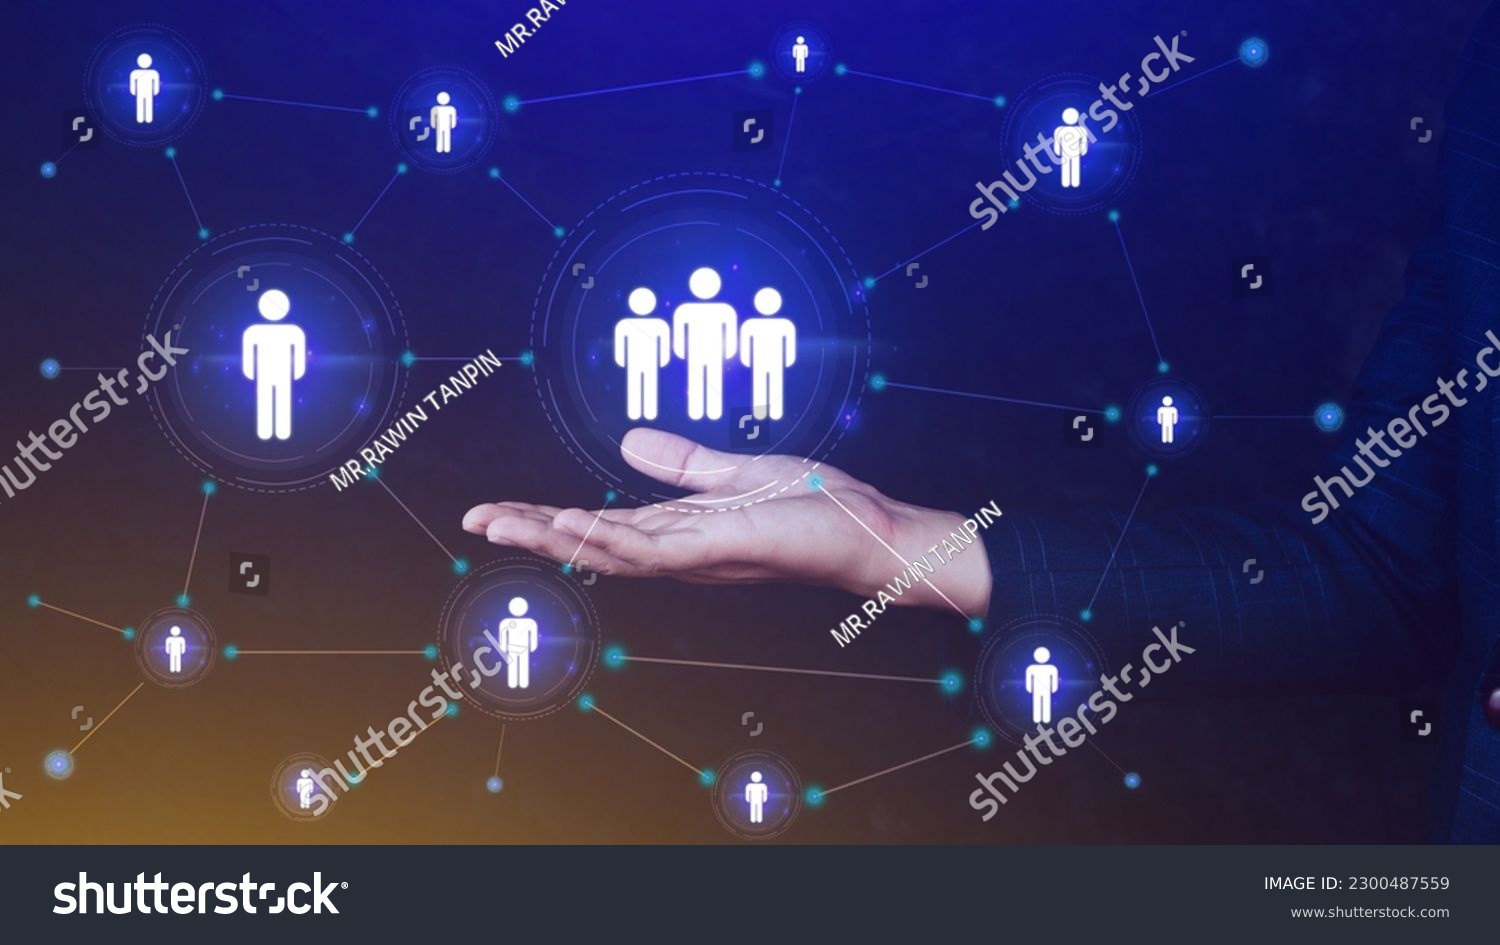 Human resources, HR management, employment, headhunting concept, Businessman holding modern social buttons on a virtual background #2300487559